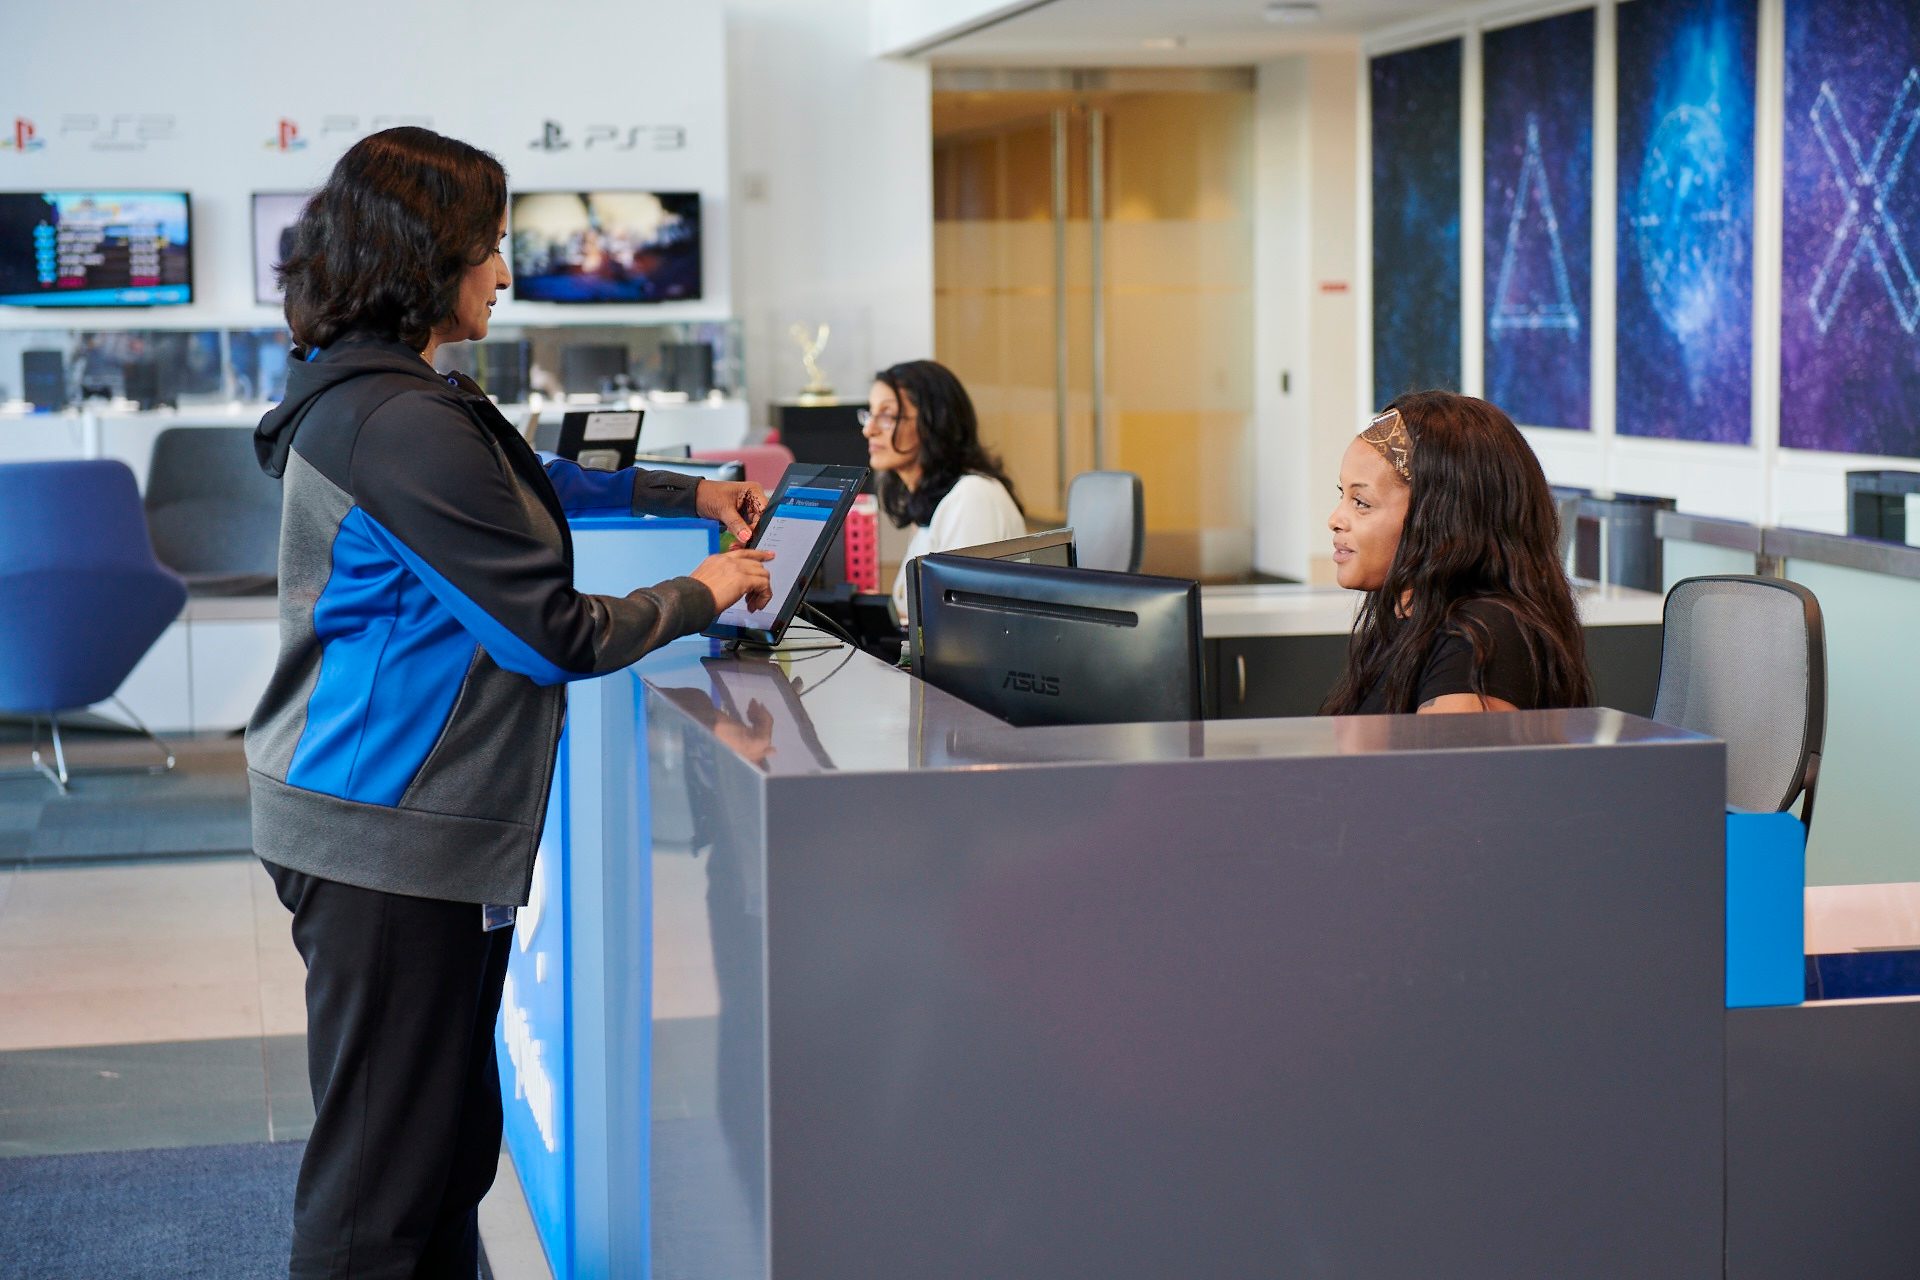 Media inquiries section of the site,  with an image of the front desk staff checking in a presumed media rep using an iPad check-in process.